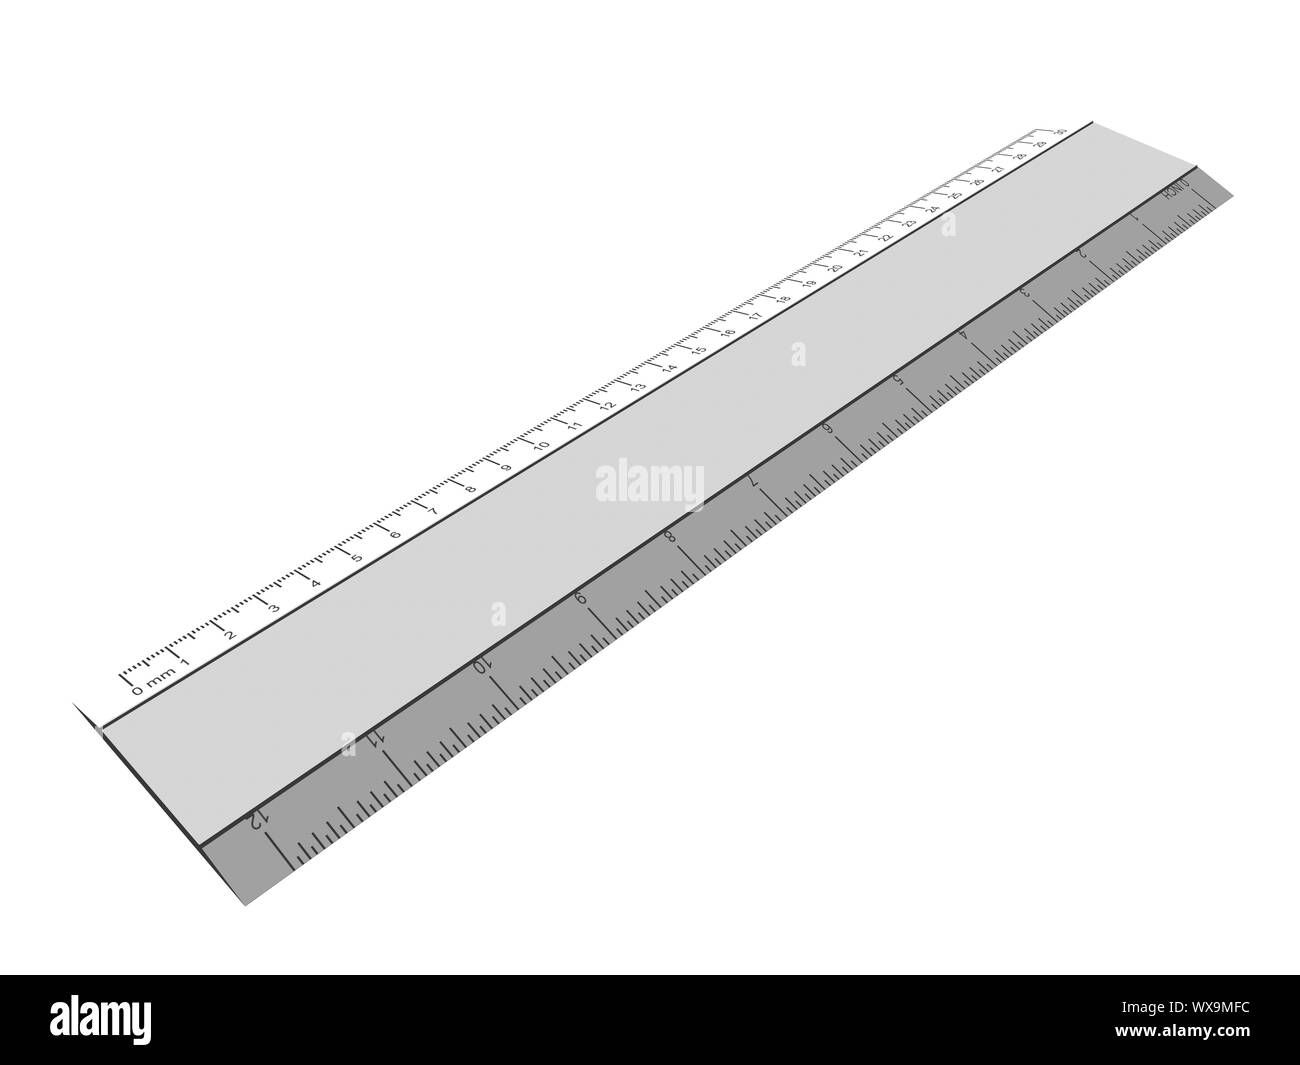 Ruler with scale for drawing Stock Photo